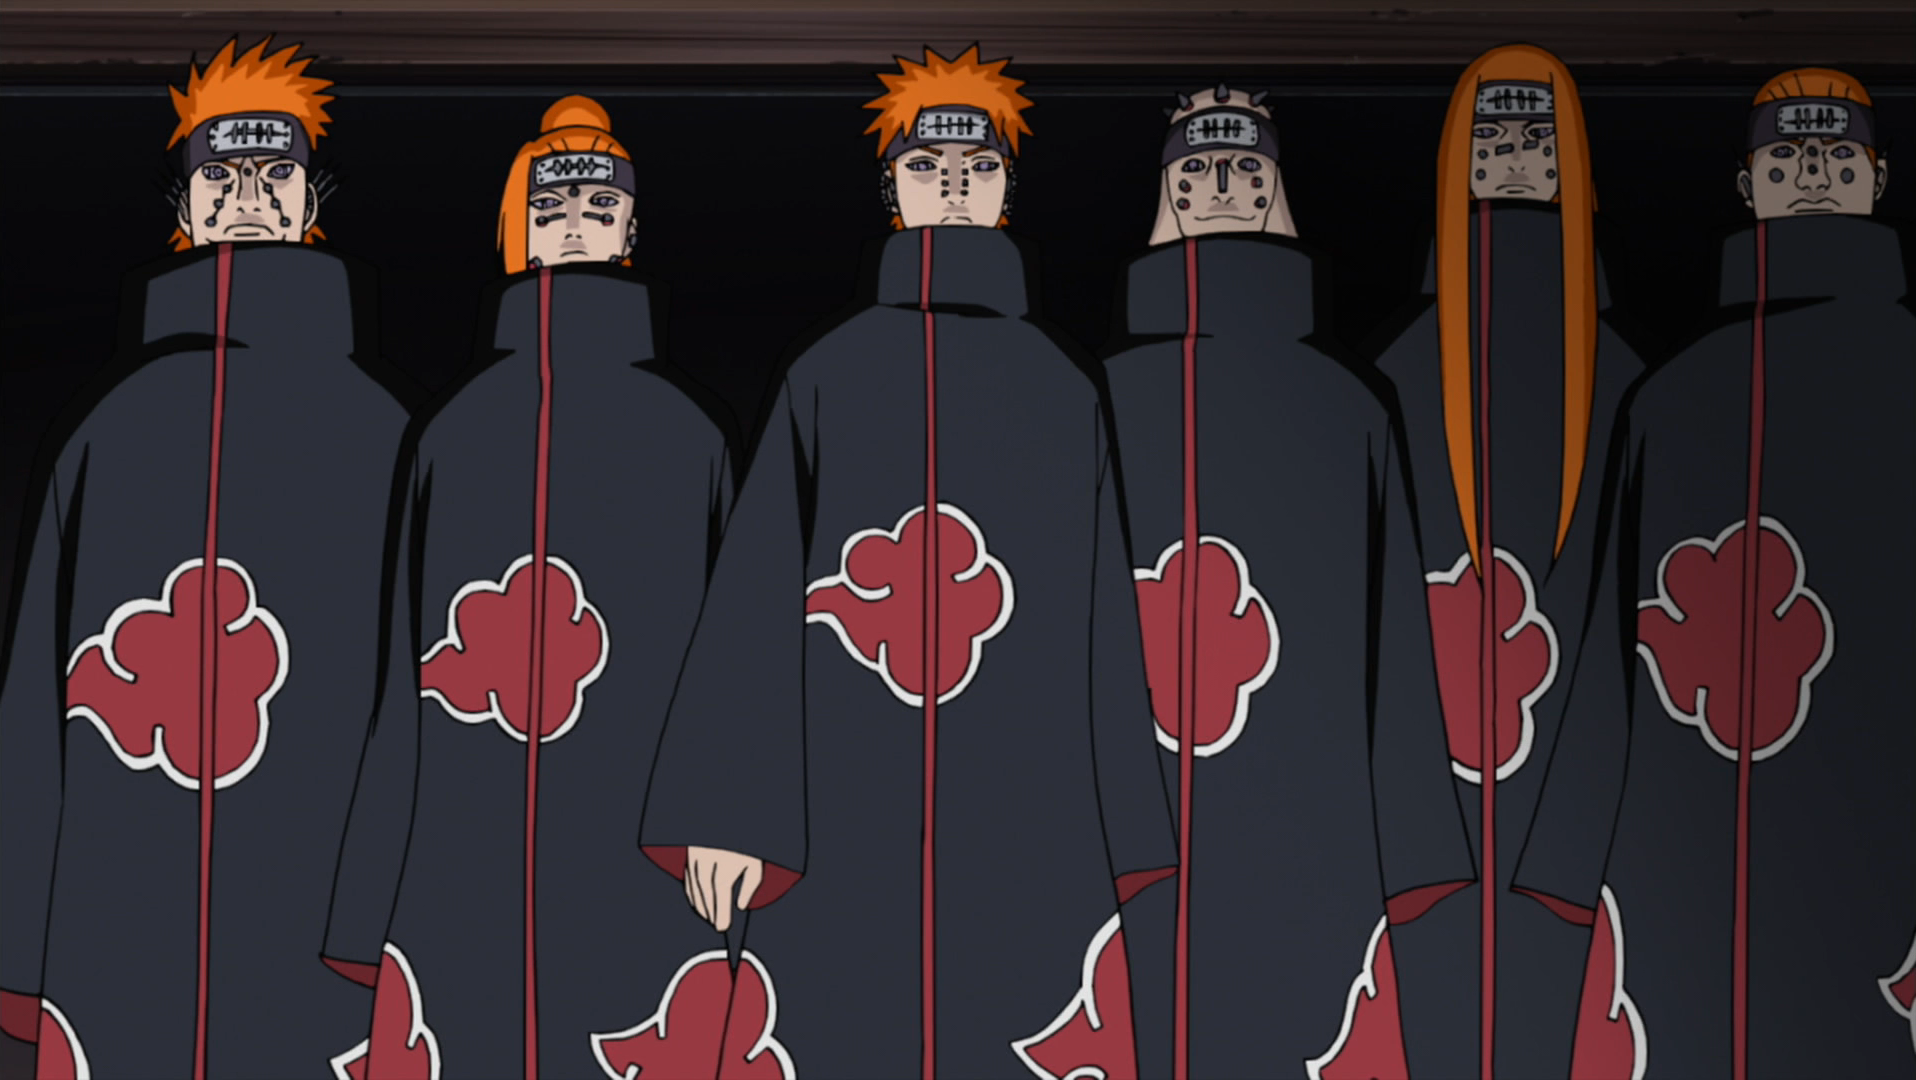 http://images2.wikia.nocookie.net/__cb20120802113210/naruto/images/d/db/Pein_Rikud%C5%8D.png